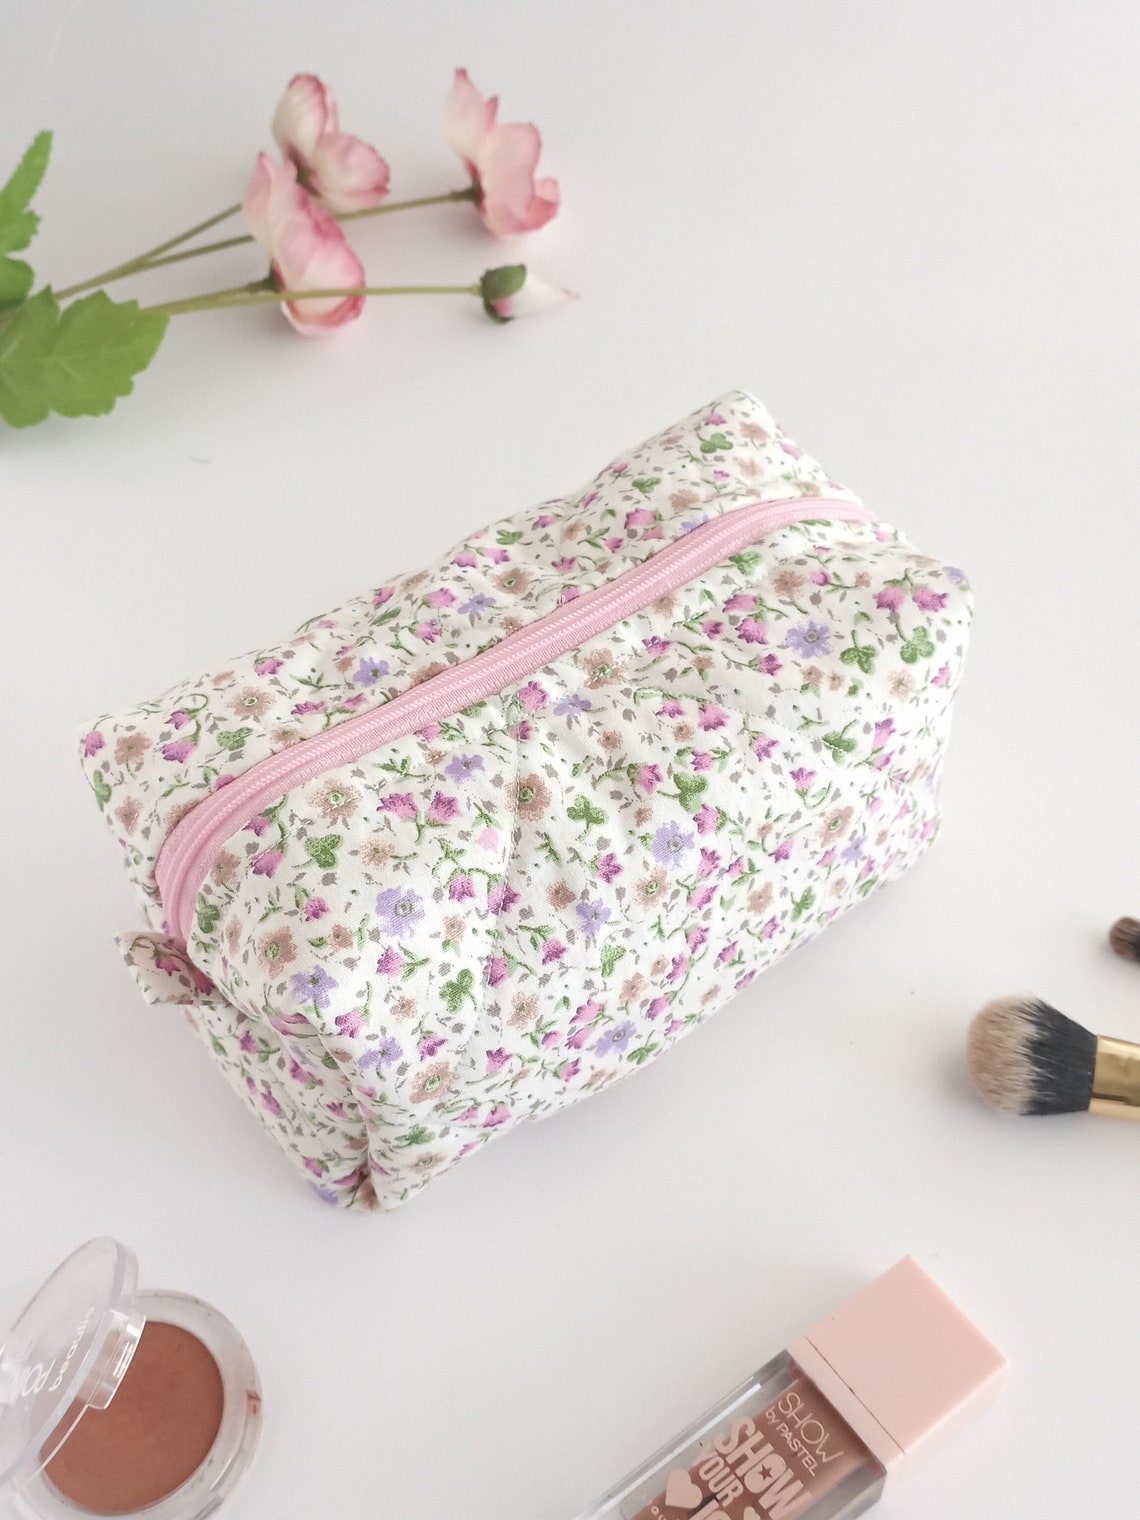 Floral Makeup Bag Quilted Cotton Cosmetic Bag Toiletry Bag - Etsy